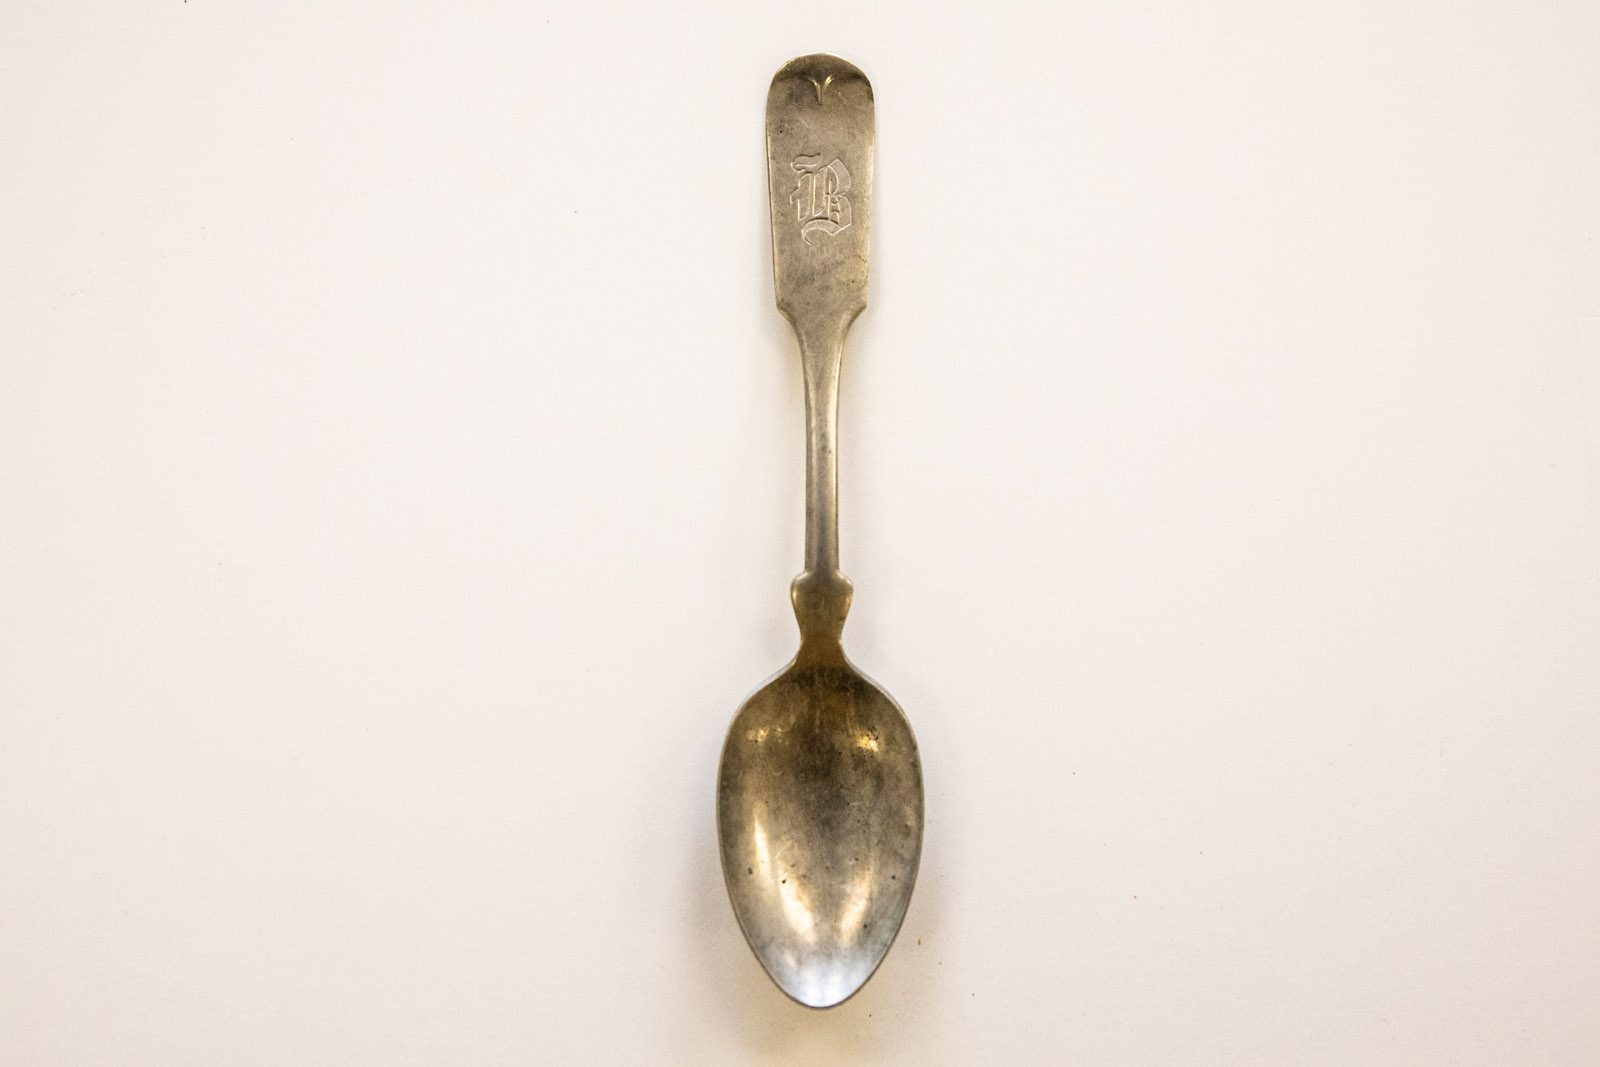 Pictured: A silver spoon monagrammed with the letter ‘B.’ Ella Axelrod has spent months investigating, cataloging and digging into the mysteries of a buried box of odd treasures from the late 1800s and early 1900s as a part of their Summer Collaborative Research.